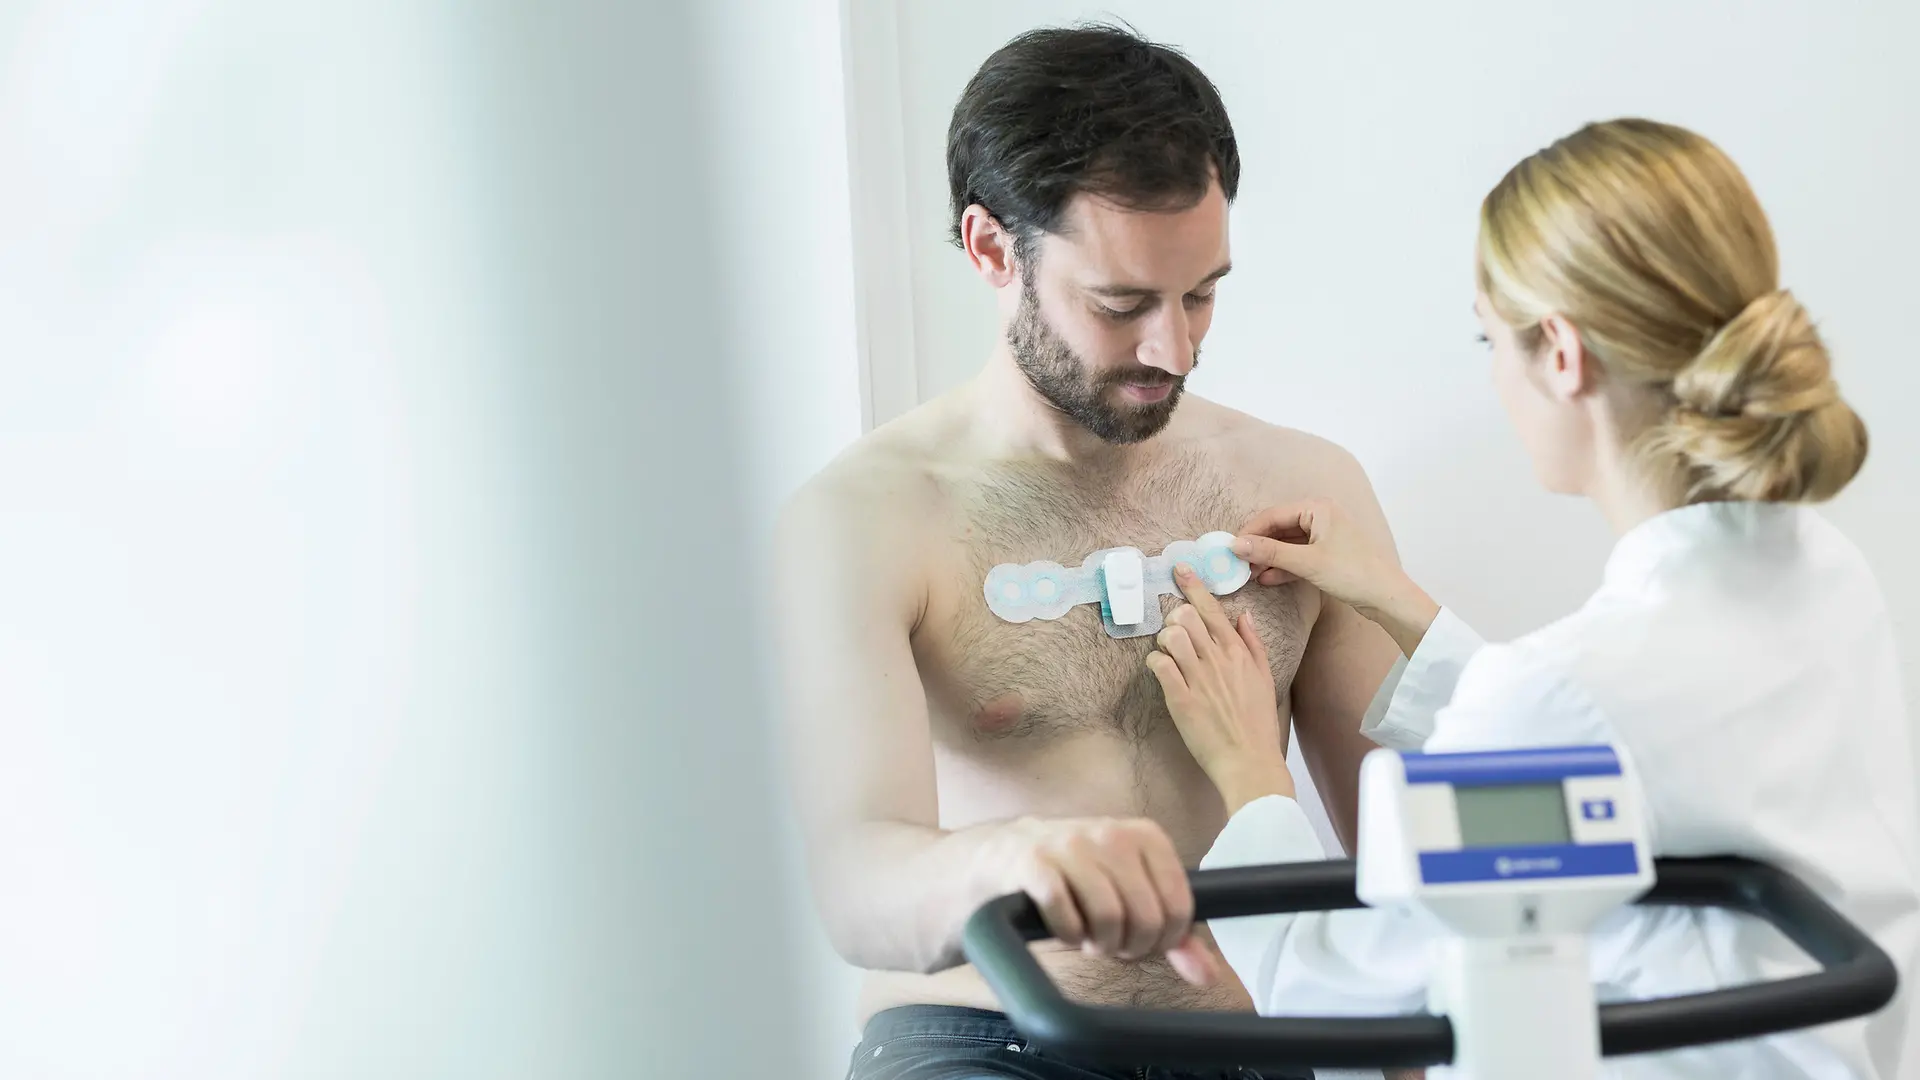 A female doctor on the right applies a smart patch to a man’s chest to perform a medical exam.